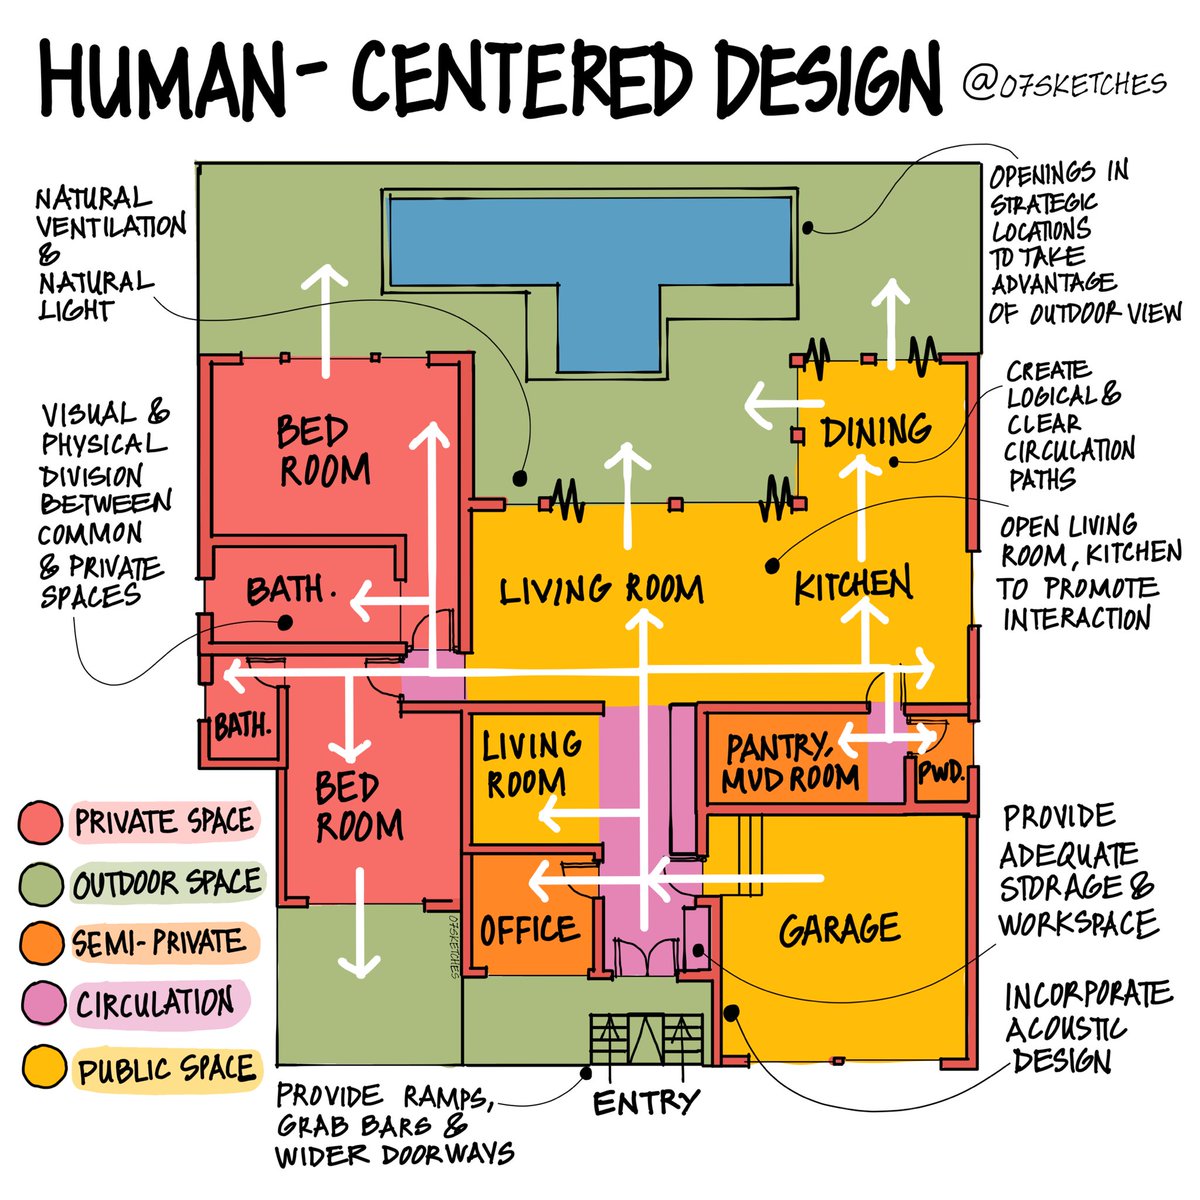 Human-Centered design - Does your house meet all of these human-centered design needs? #humancentered #design #house